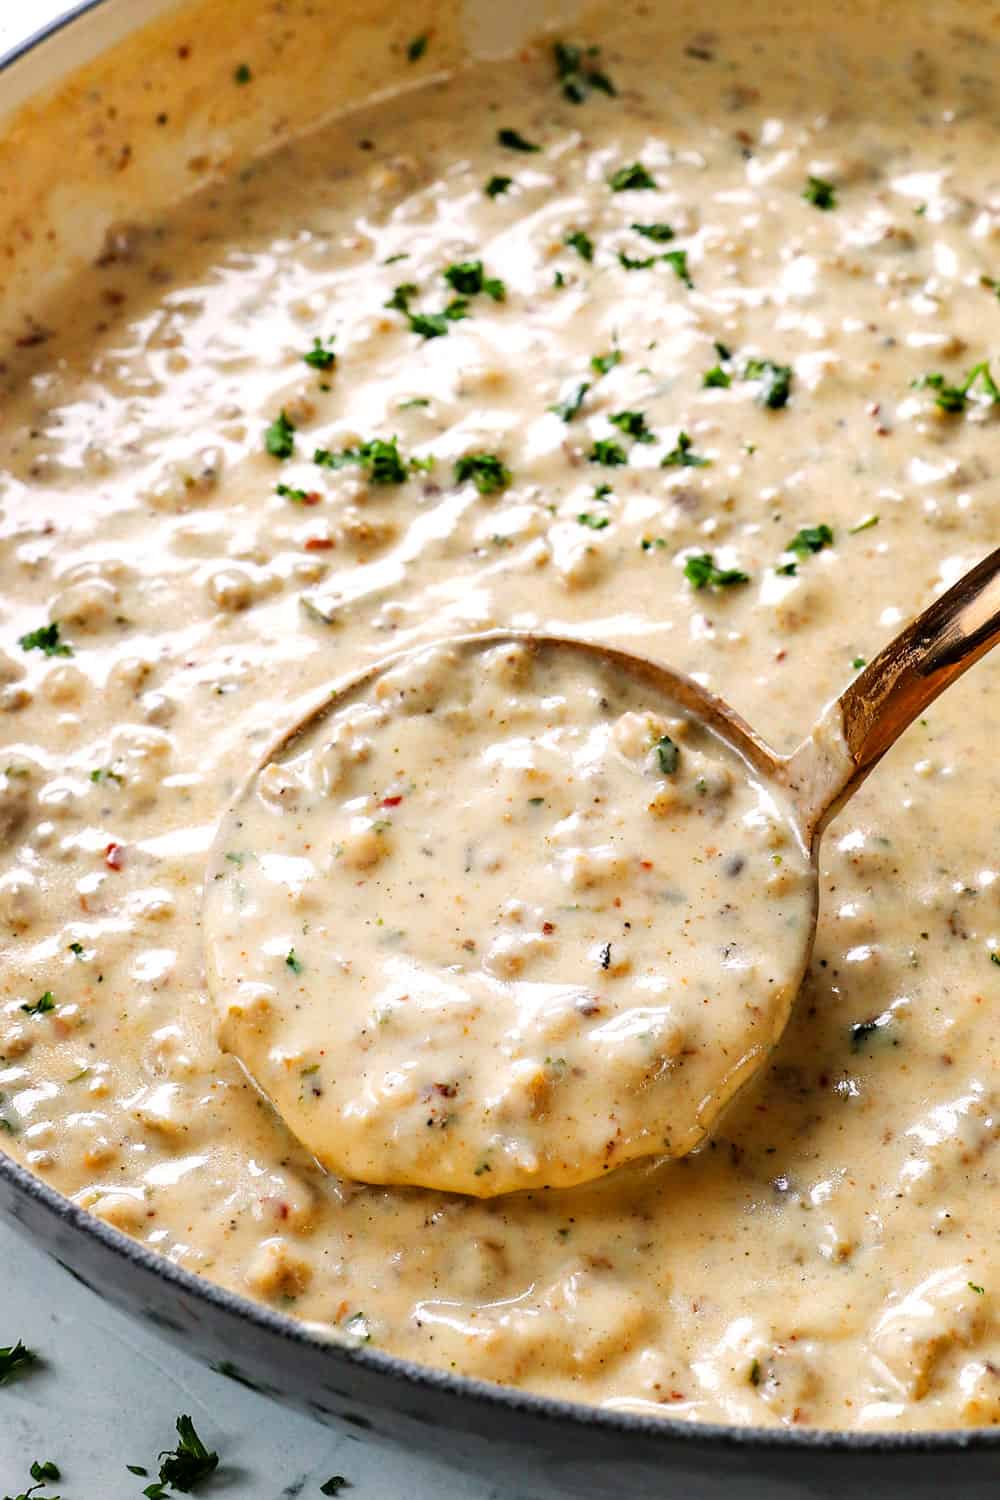 showing how to make biscuits and gravy recipe by simmering sausage gravy until thick and creamy